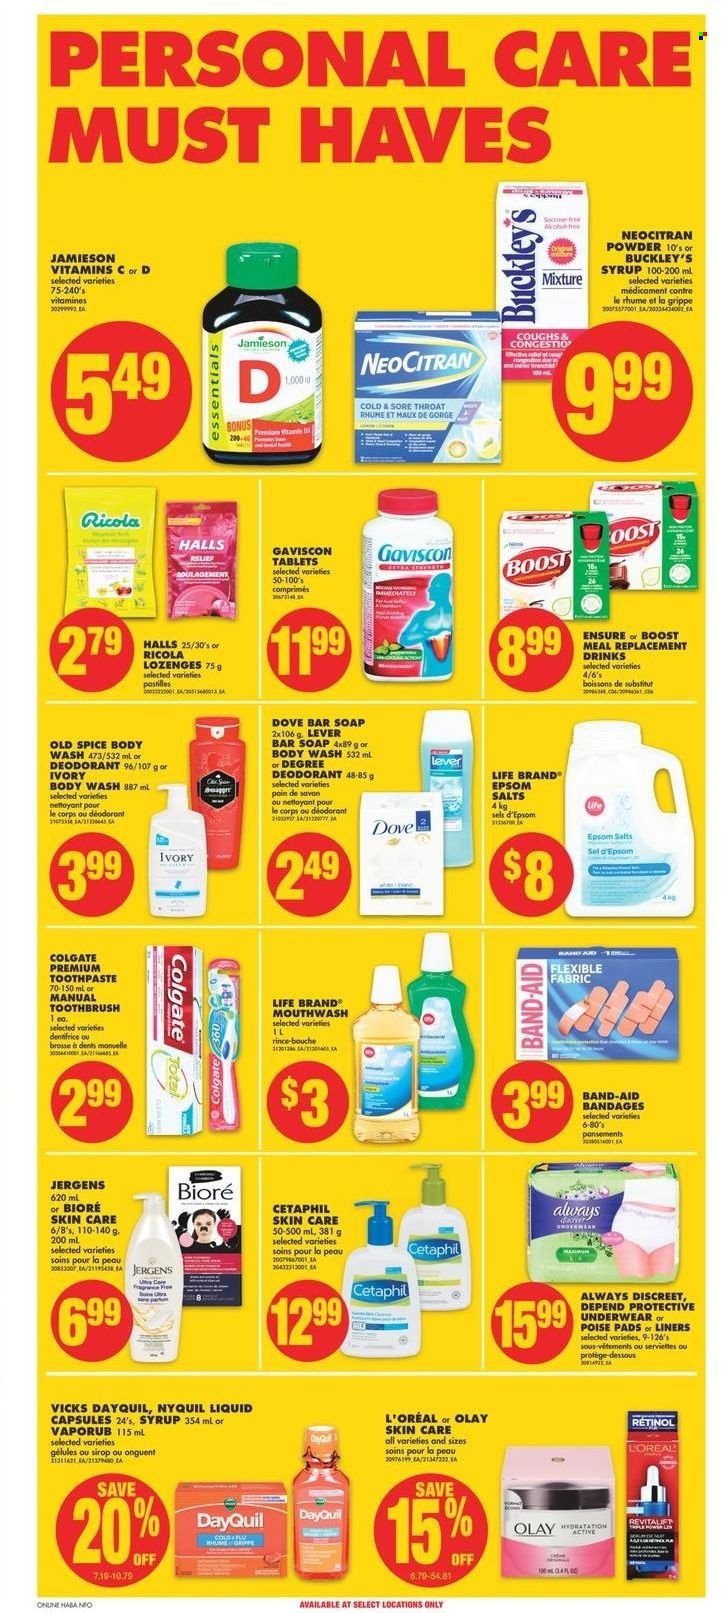 thumbnail - No Frills Flyer - January 20, 2022 - January 26, 2022 - Sales products - Ricola, Halls, spice, syrup, Boost, body wash, soap bar, soap, toothbrush, toothpaste, mouthwash, sanitary pads, Always Discreet, L’Oréal, Olay, Bioré®, Jergens, anti-perspirant, Vicks, DayQuil, NyQuil, VapoRub, Gaviscon, band-aid, Dove, Colgate, Old Spice, deodorant. Page 8.